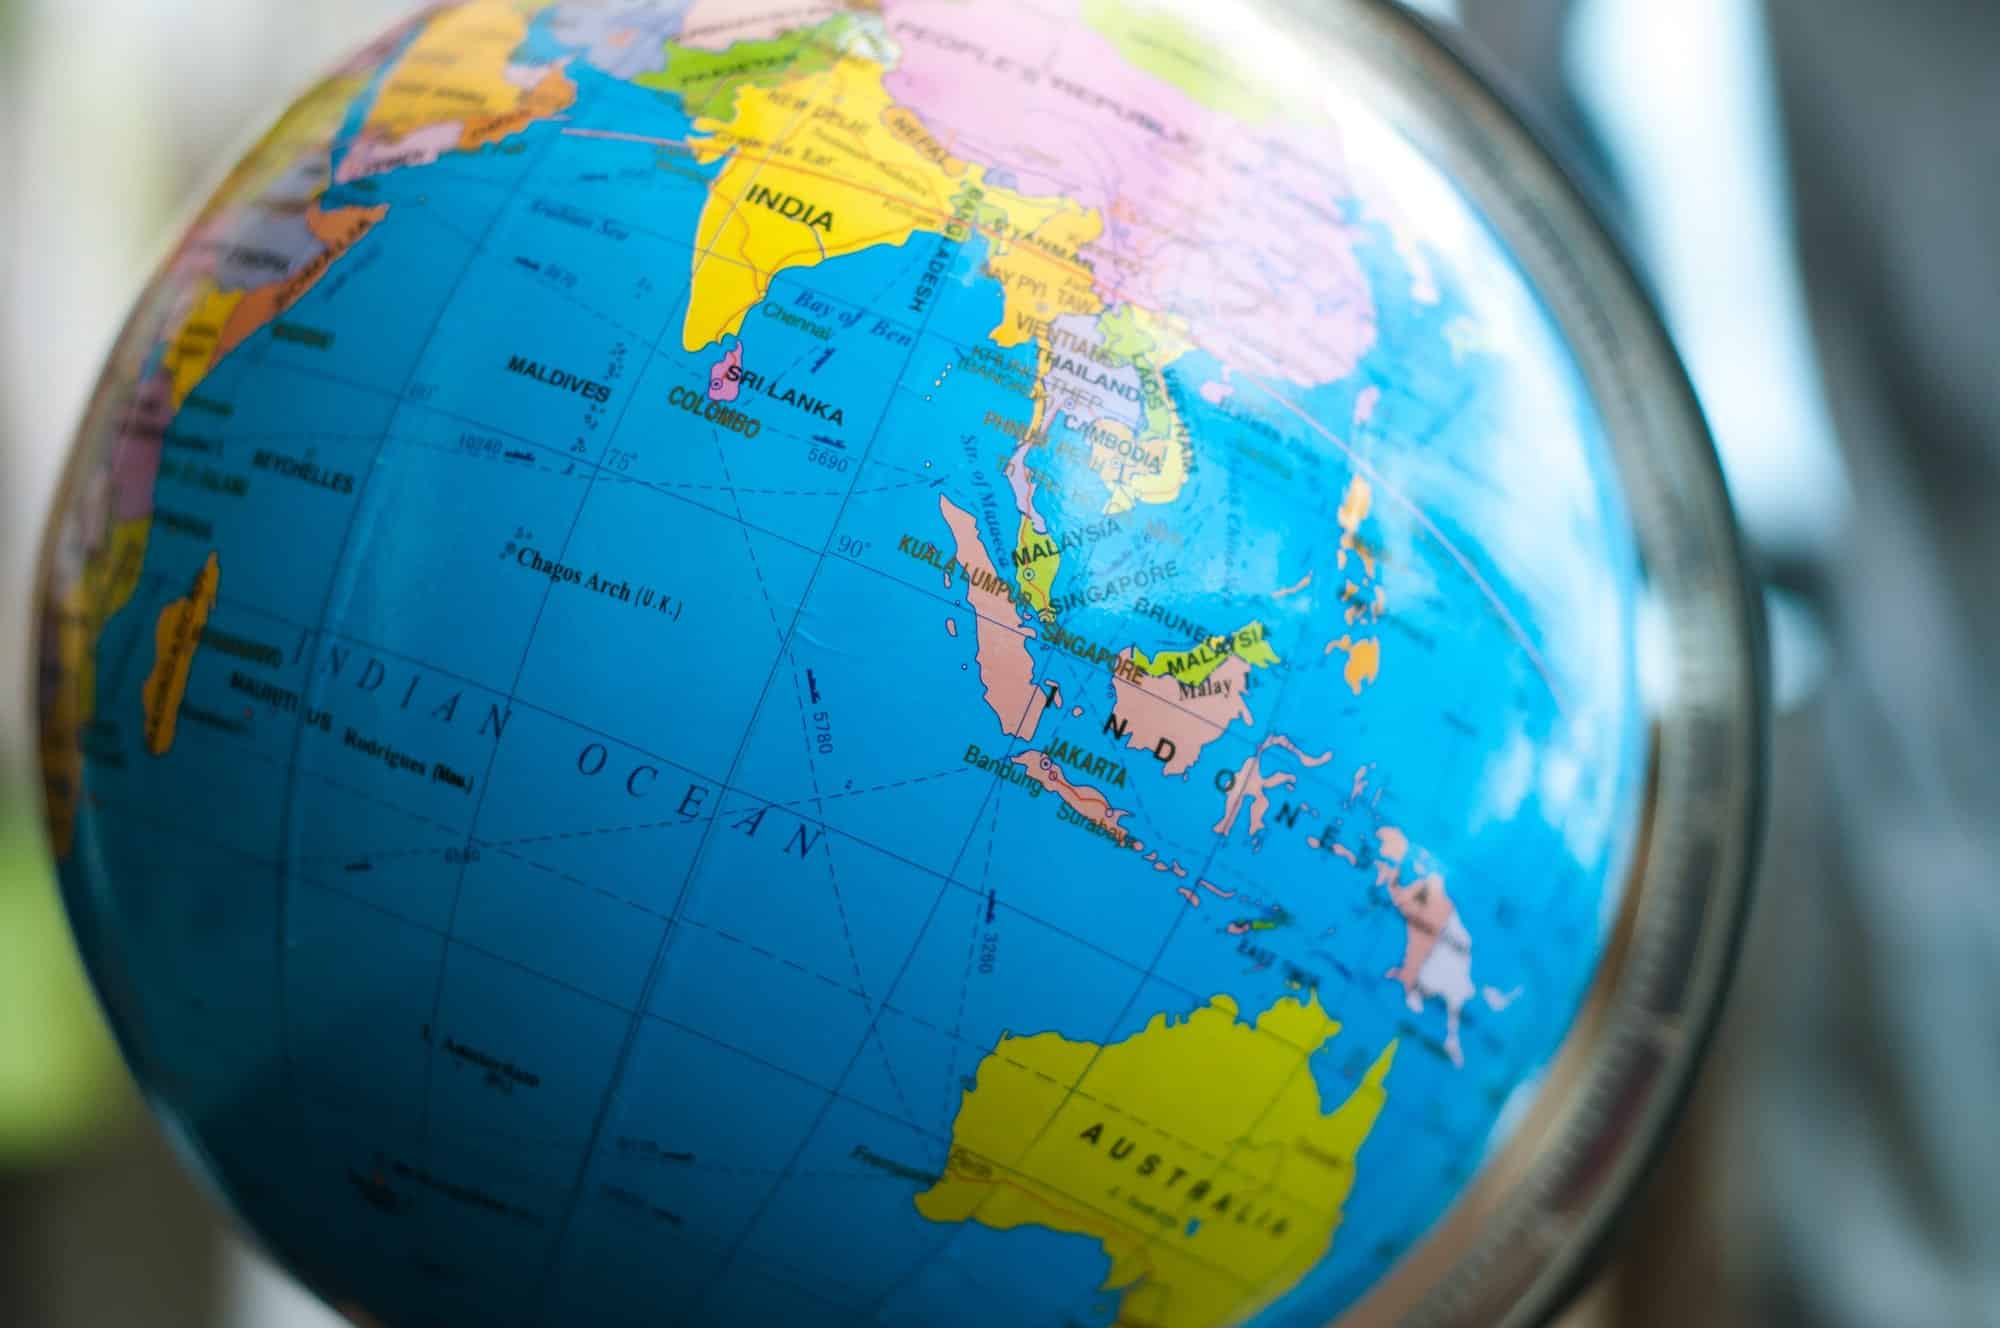 Indonesia on the globe map.